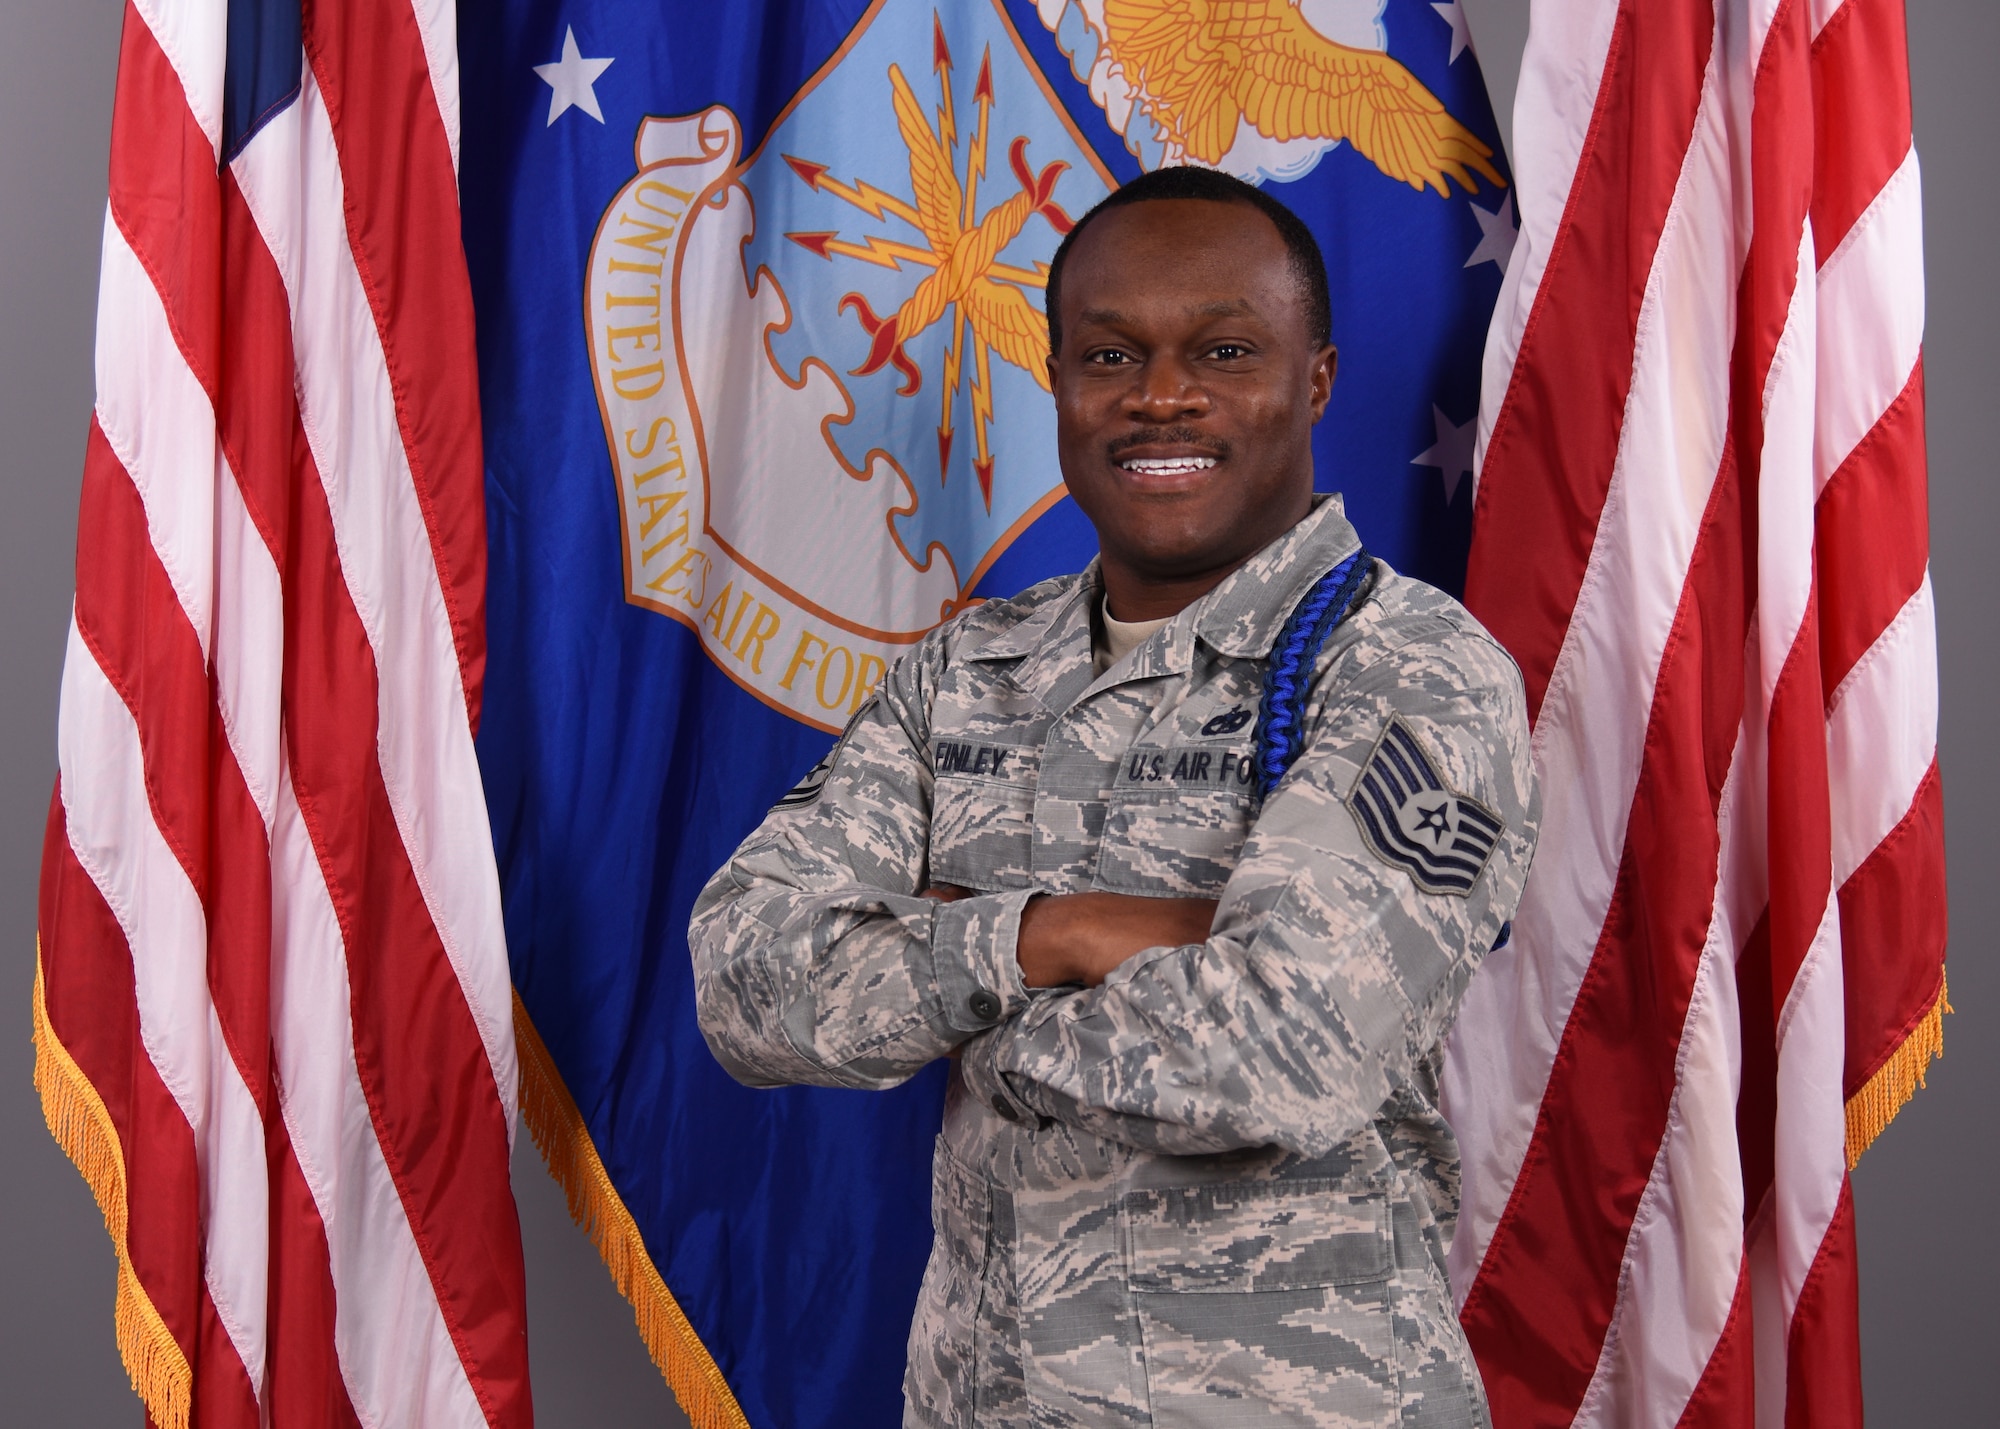 U.S. Air Force Tech. Sgt. Derwin Finley, 312th Training Squadron assistant flight chief and master military training leader, displays his new royal and dark blue colored aiguillette in the 17th Training Wing Public Affairs photo studio on Goodfellow Air Force Base, Texas, Feb. 12, 2020. The aiguillette physically distinguishes Finley as a beacon to mentor, train and lead not only technical training students, but other MTLs. (U.S. Air Force photo by Airman 1st Class Abbey Rieves)